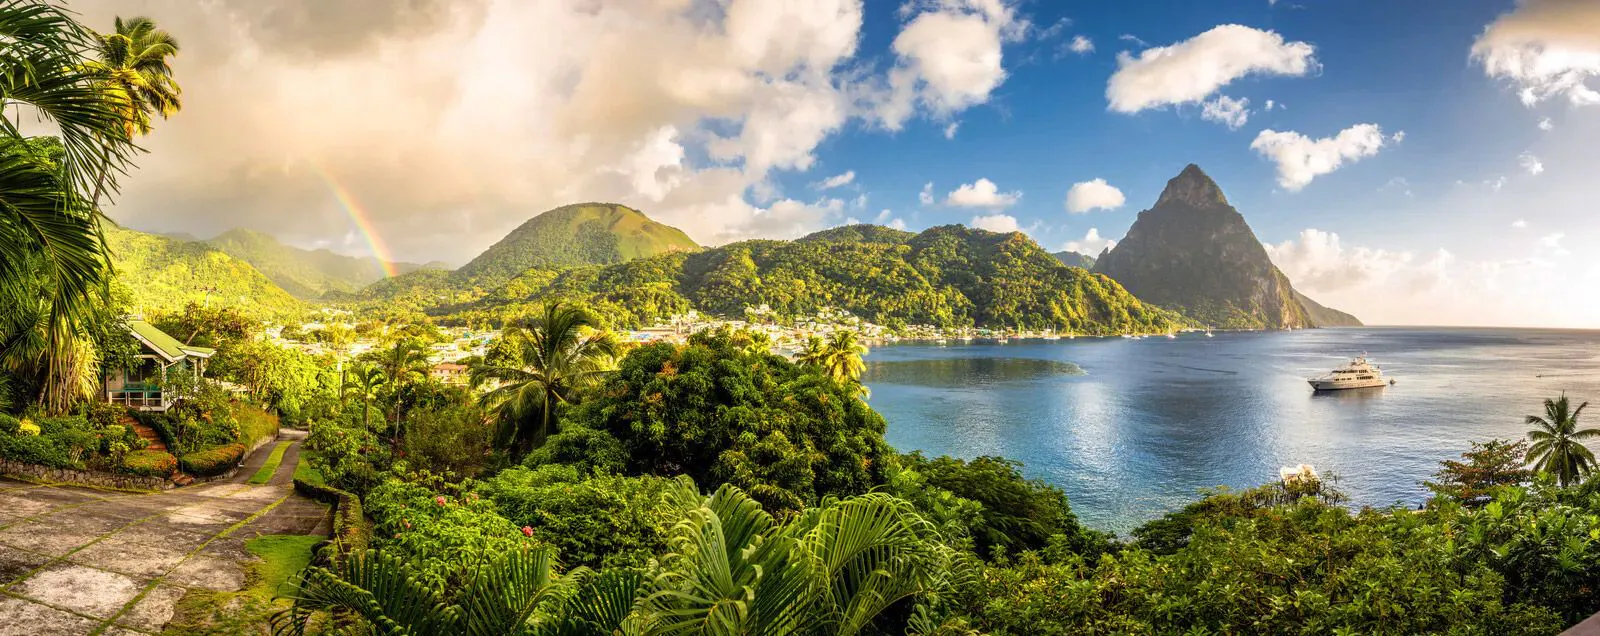 View of the St Lucia coastline with the Pitons